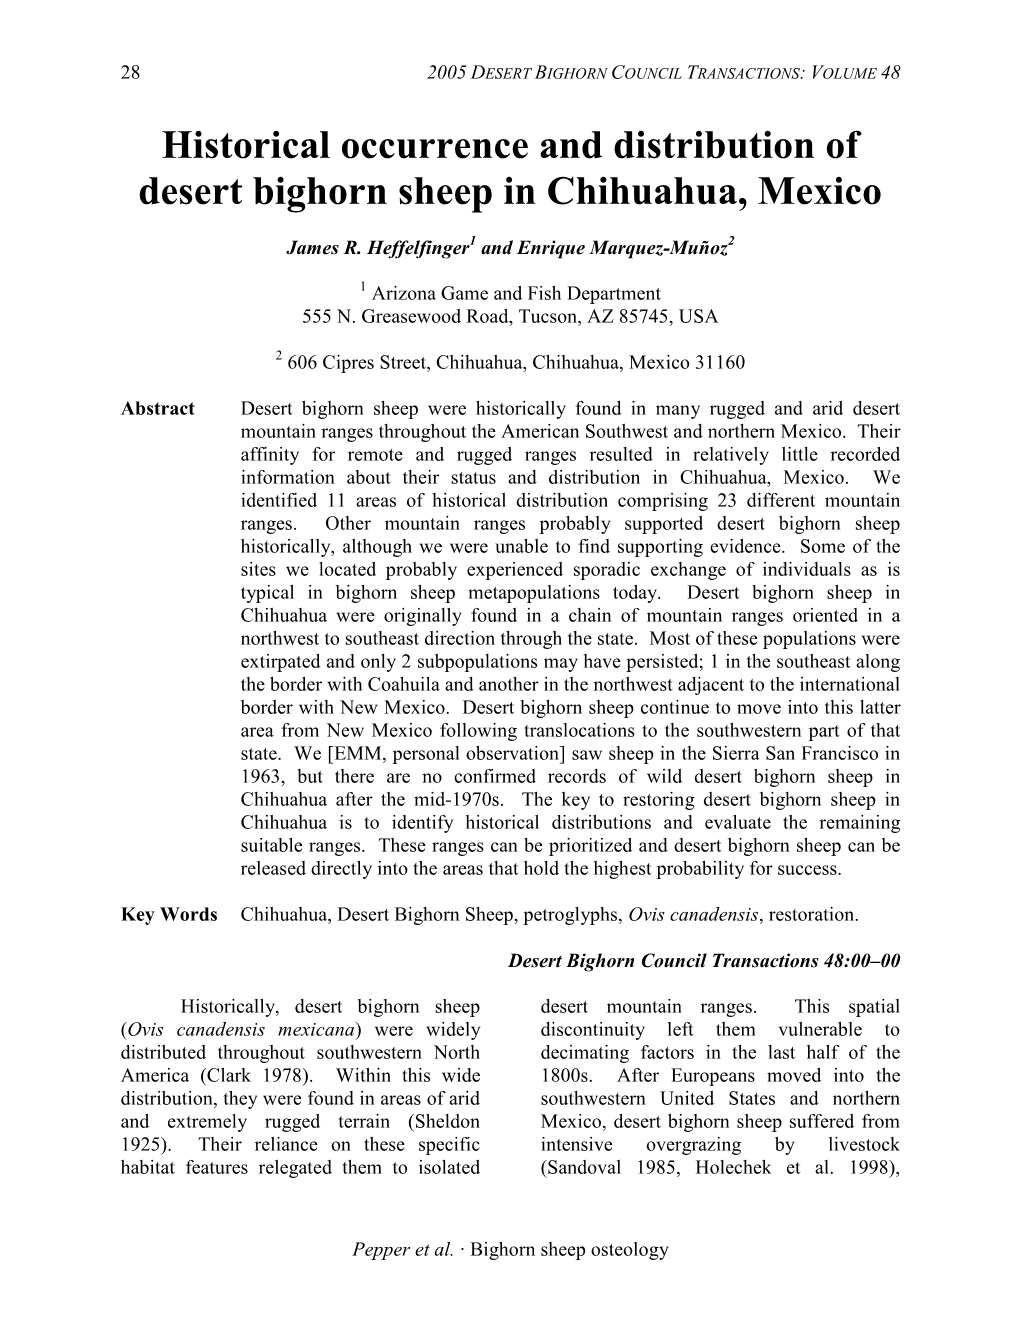 Historical Occurrence and Distribution of Desert Bighorn Sheep in Chihuahua, Mexico